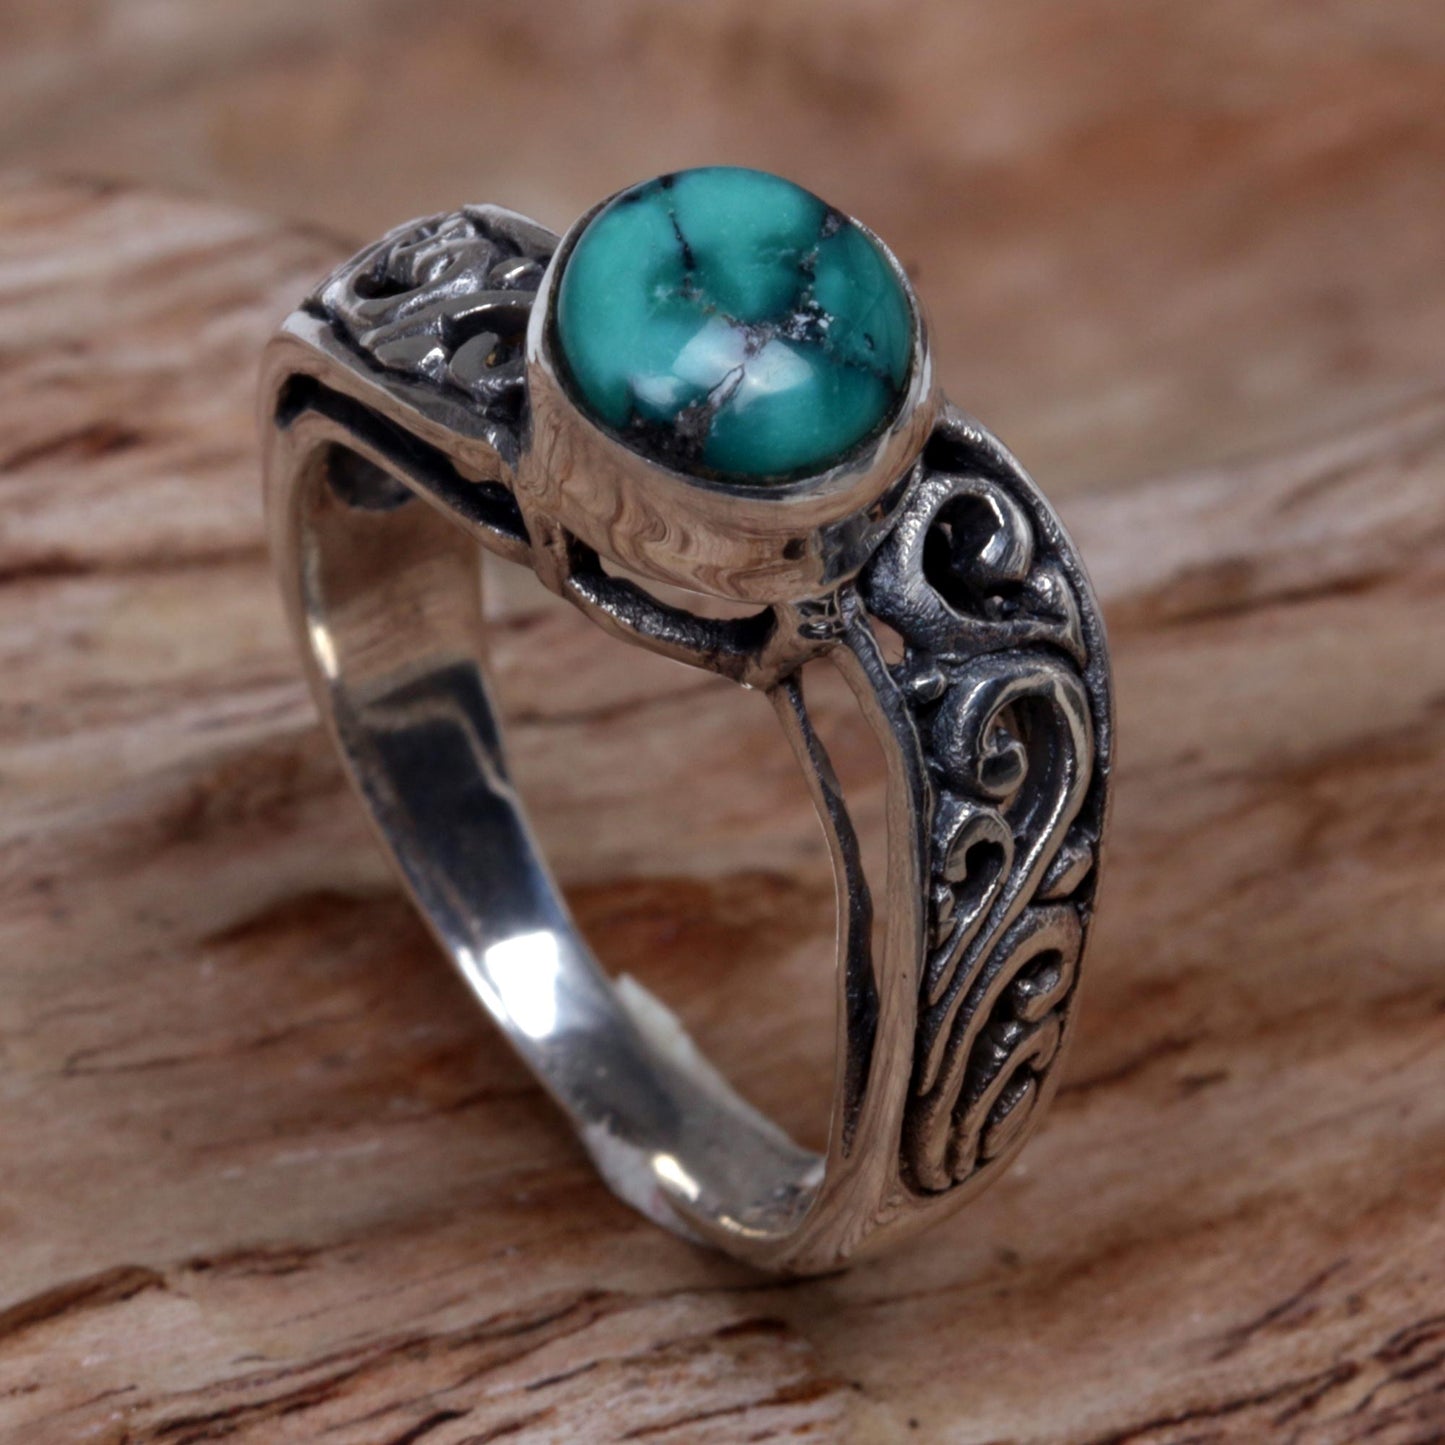 Bali Vines Reconstituted Turquoise Single Stone Ring from Indonesia